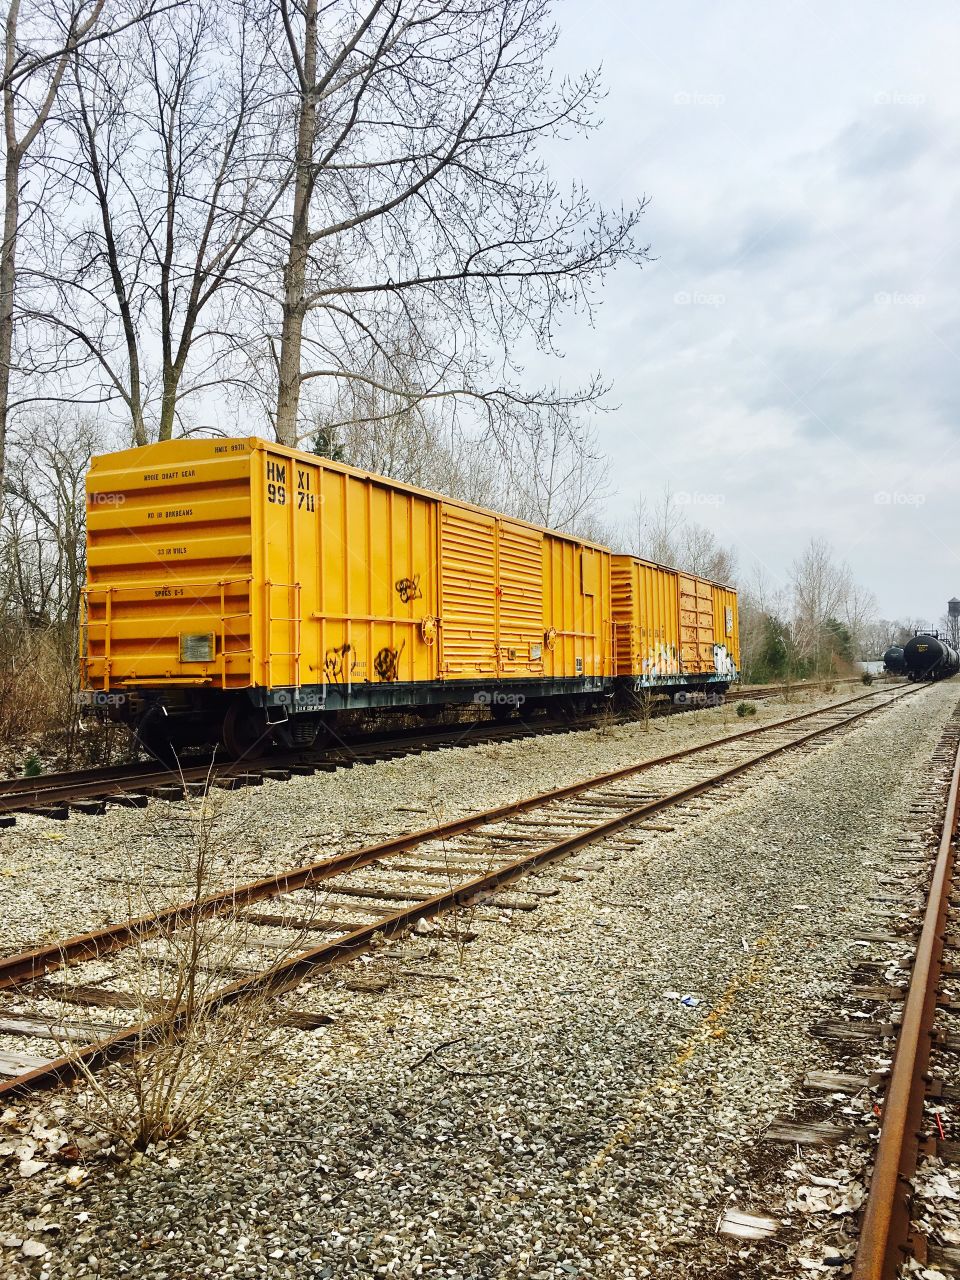 Bright freight trains